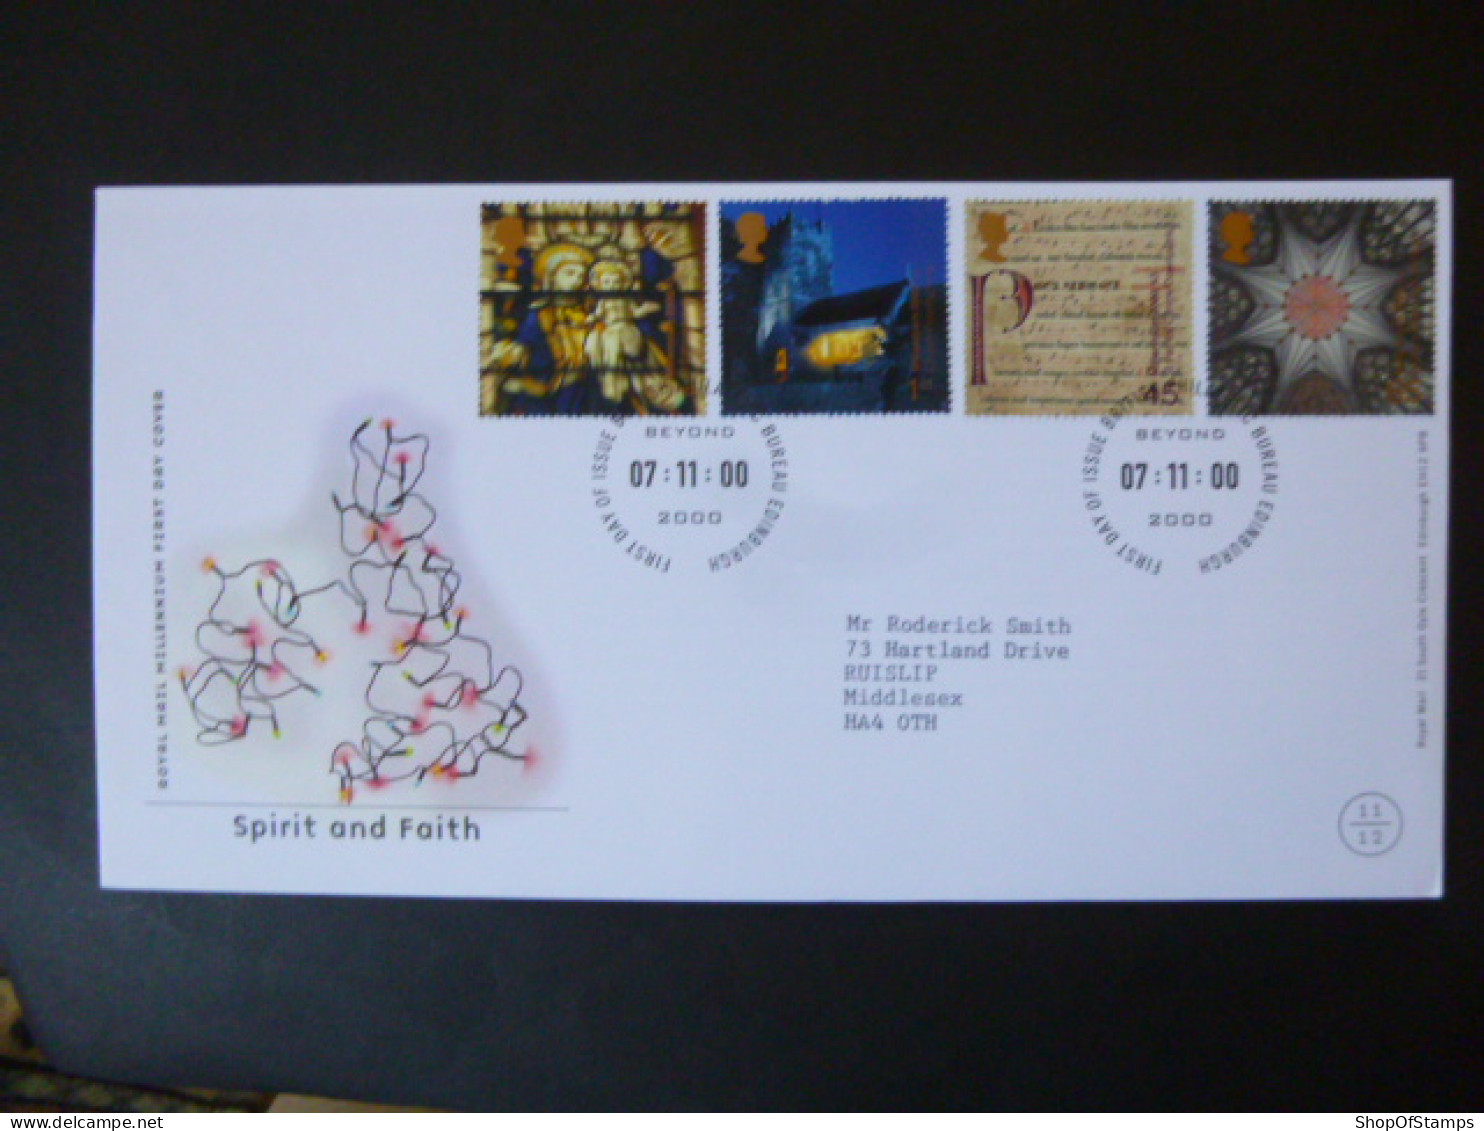 GREAT BRITAIN SG 2170-73 MILLENIUM PROJECTS, SPIRIT AND FAITH FDC EDINBURGH - Unclassified